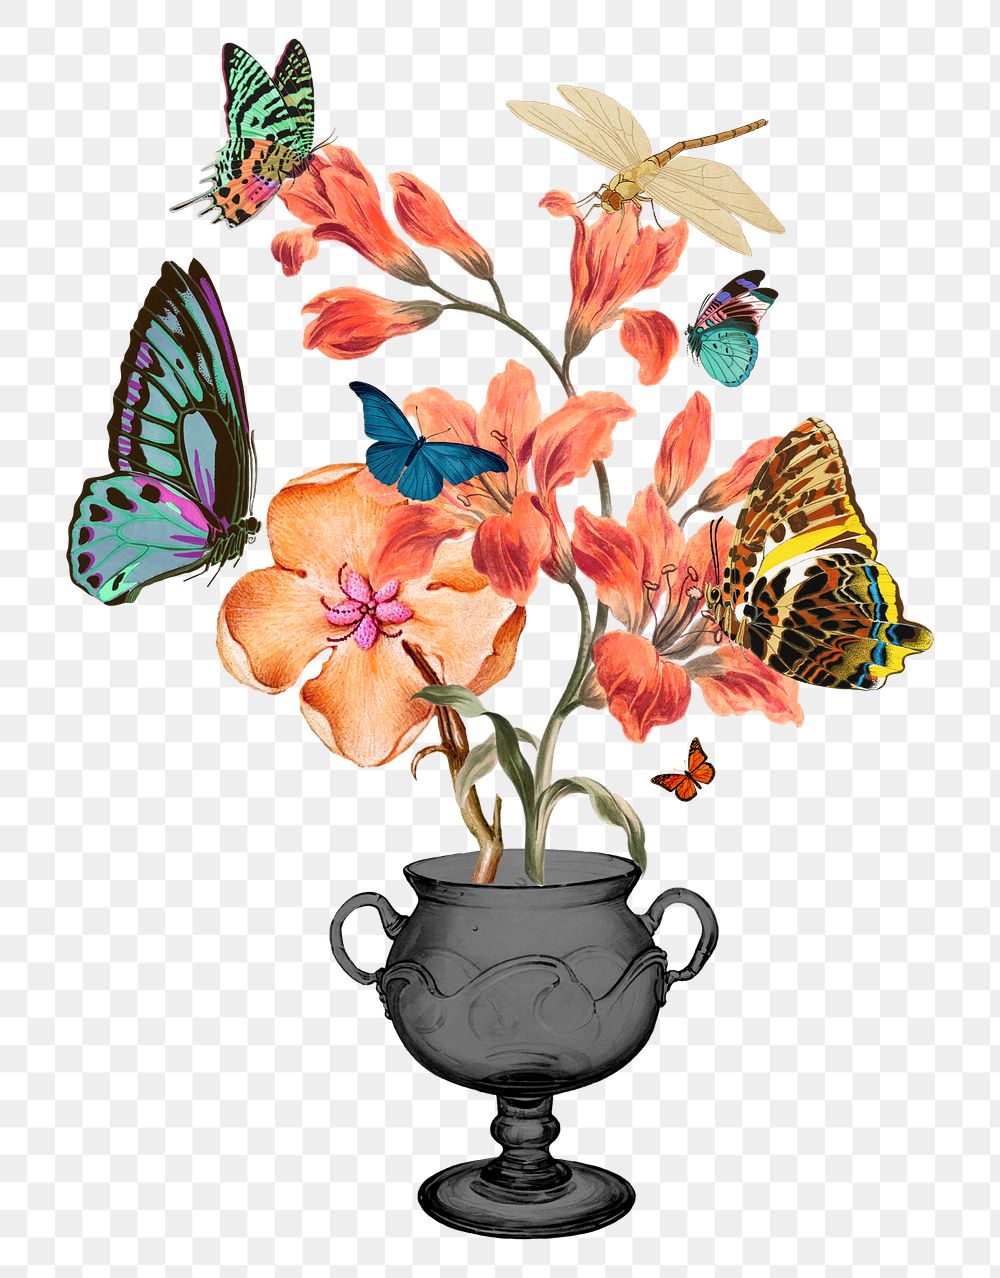 PNG Flower and butterfly, vintage botanical illustration, transparent background. Remixed by rawpixel.